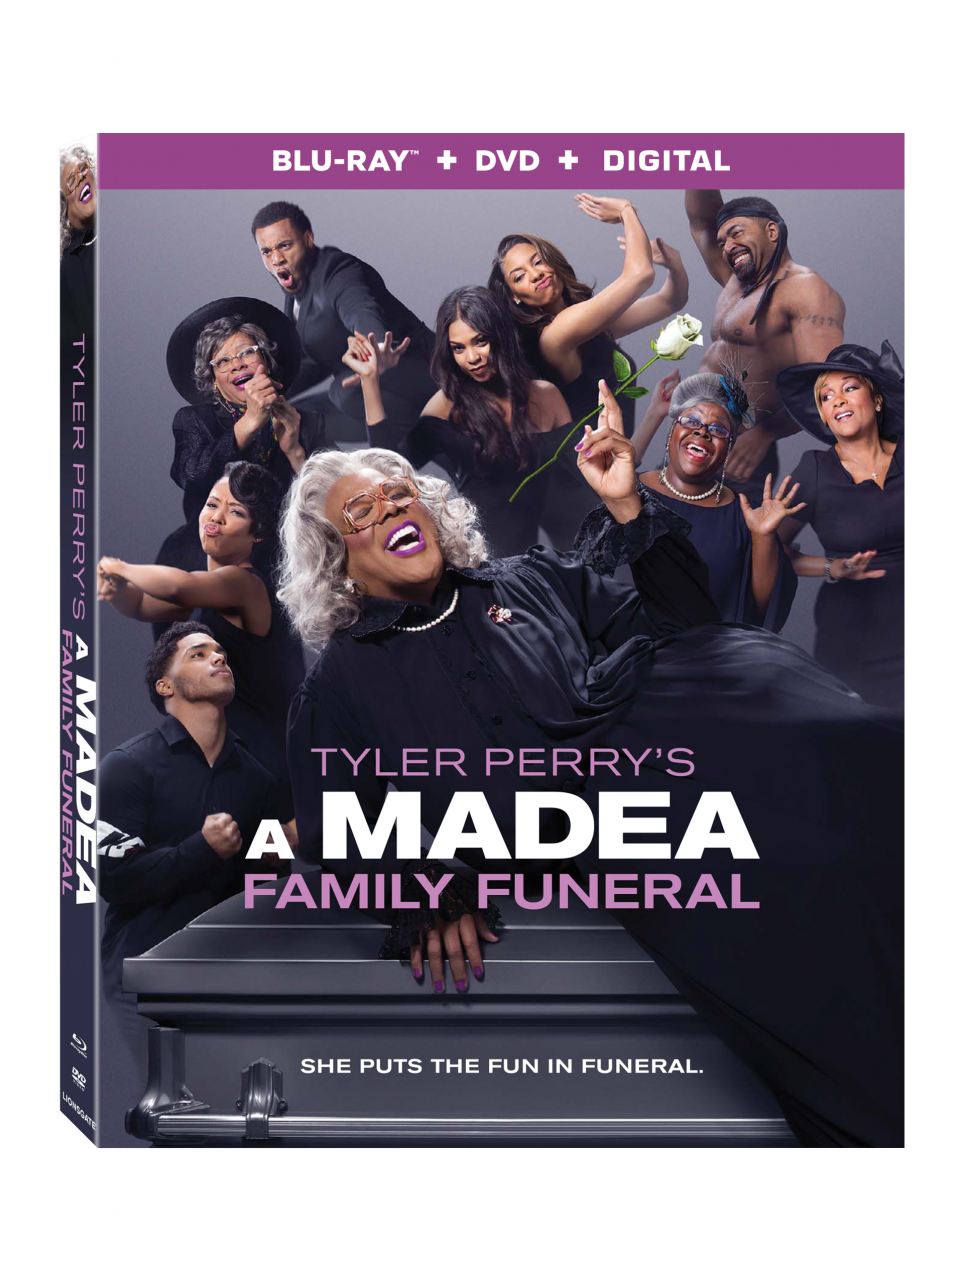 A Madea Family Funeral Blu-Ray Combo cover (Lionsgate Home Entertainment)